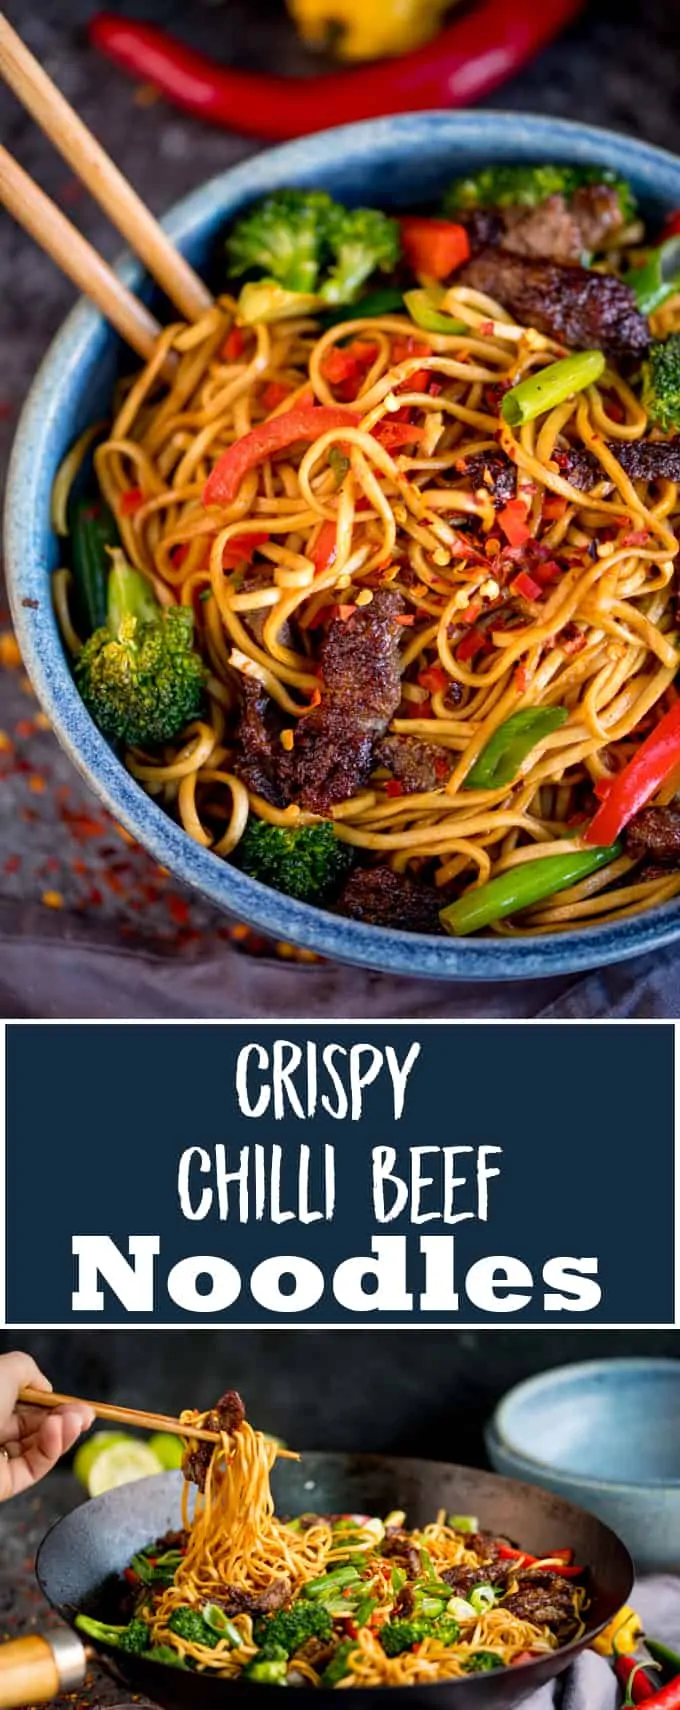 My Crispy Chilli Beef Noodles can be on the table in 20 minutes. A great alternative to that Chinese takeaway! #betterthantakeout #chilibeef #chillibeef #chinese #asianfood